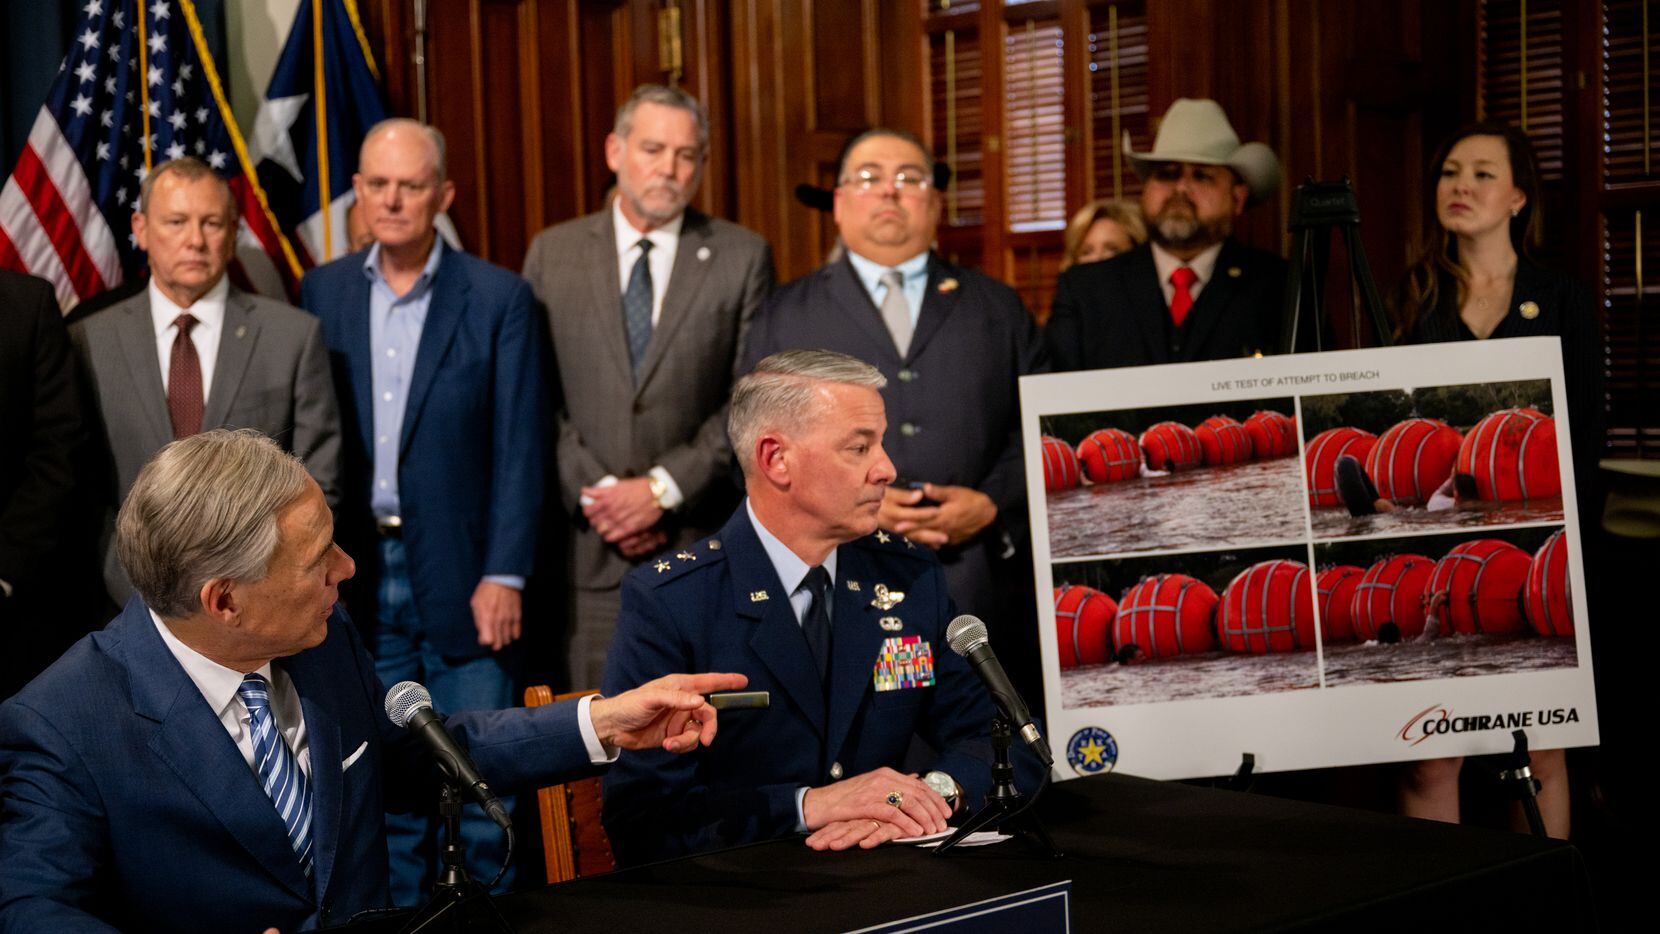 Texas is deploying a long string of buoys in the middle of the Rio Grande River in a new...